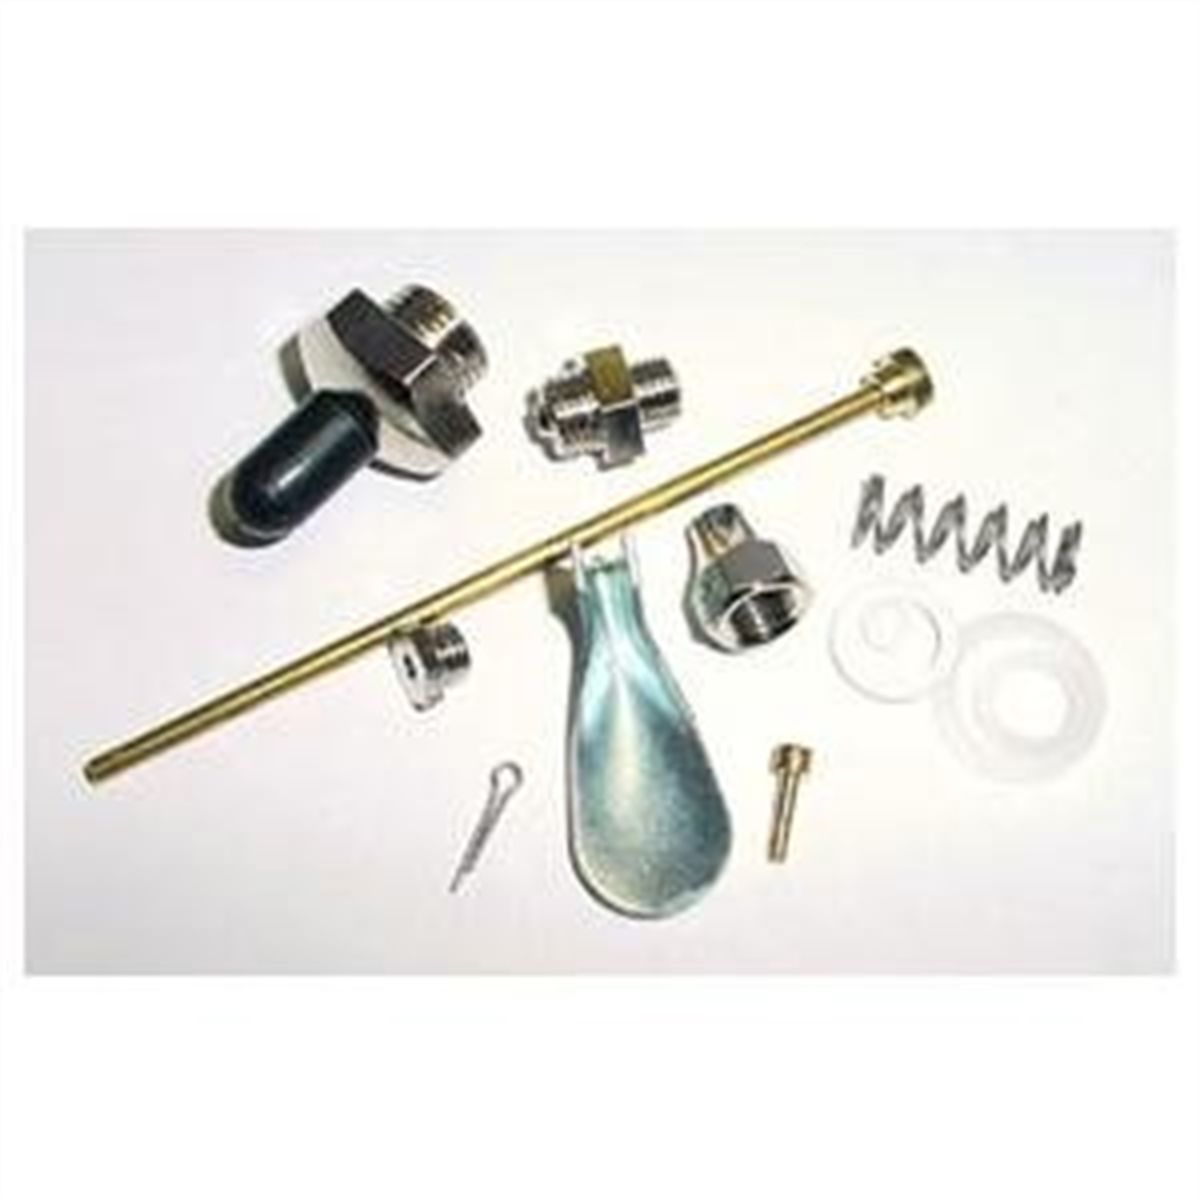 Complete Repair Kit for Model A